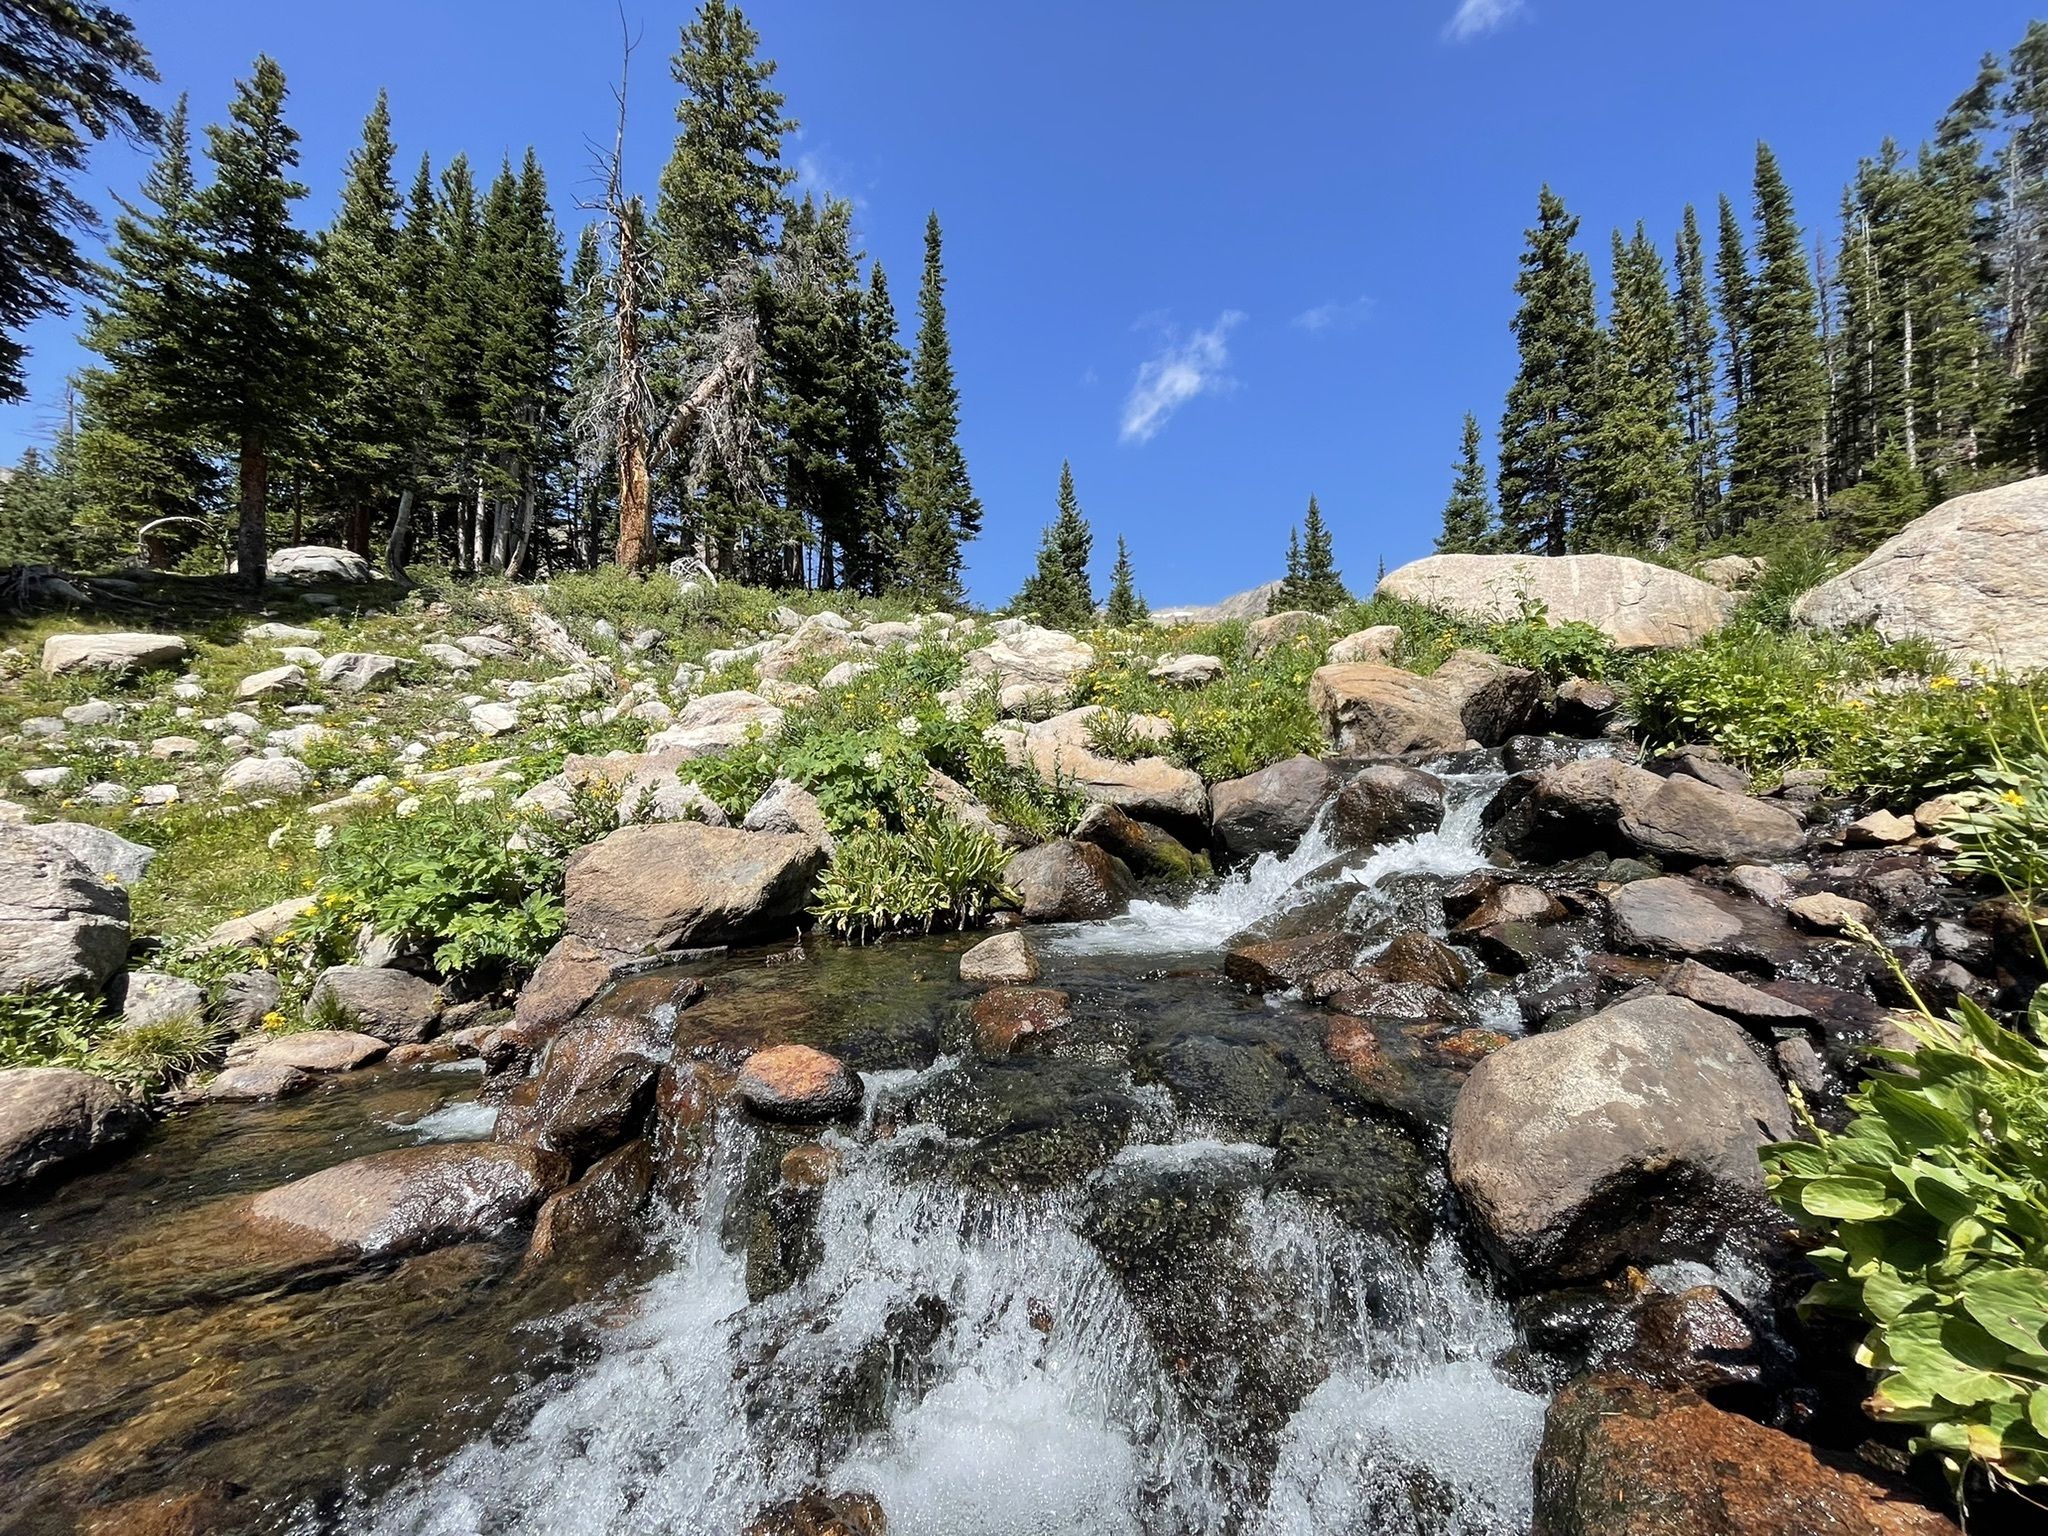 Photos of Indian Peaks Wilderness, Colorado fishing trails